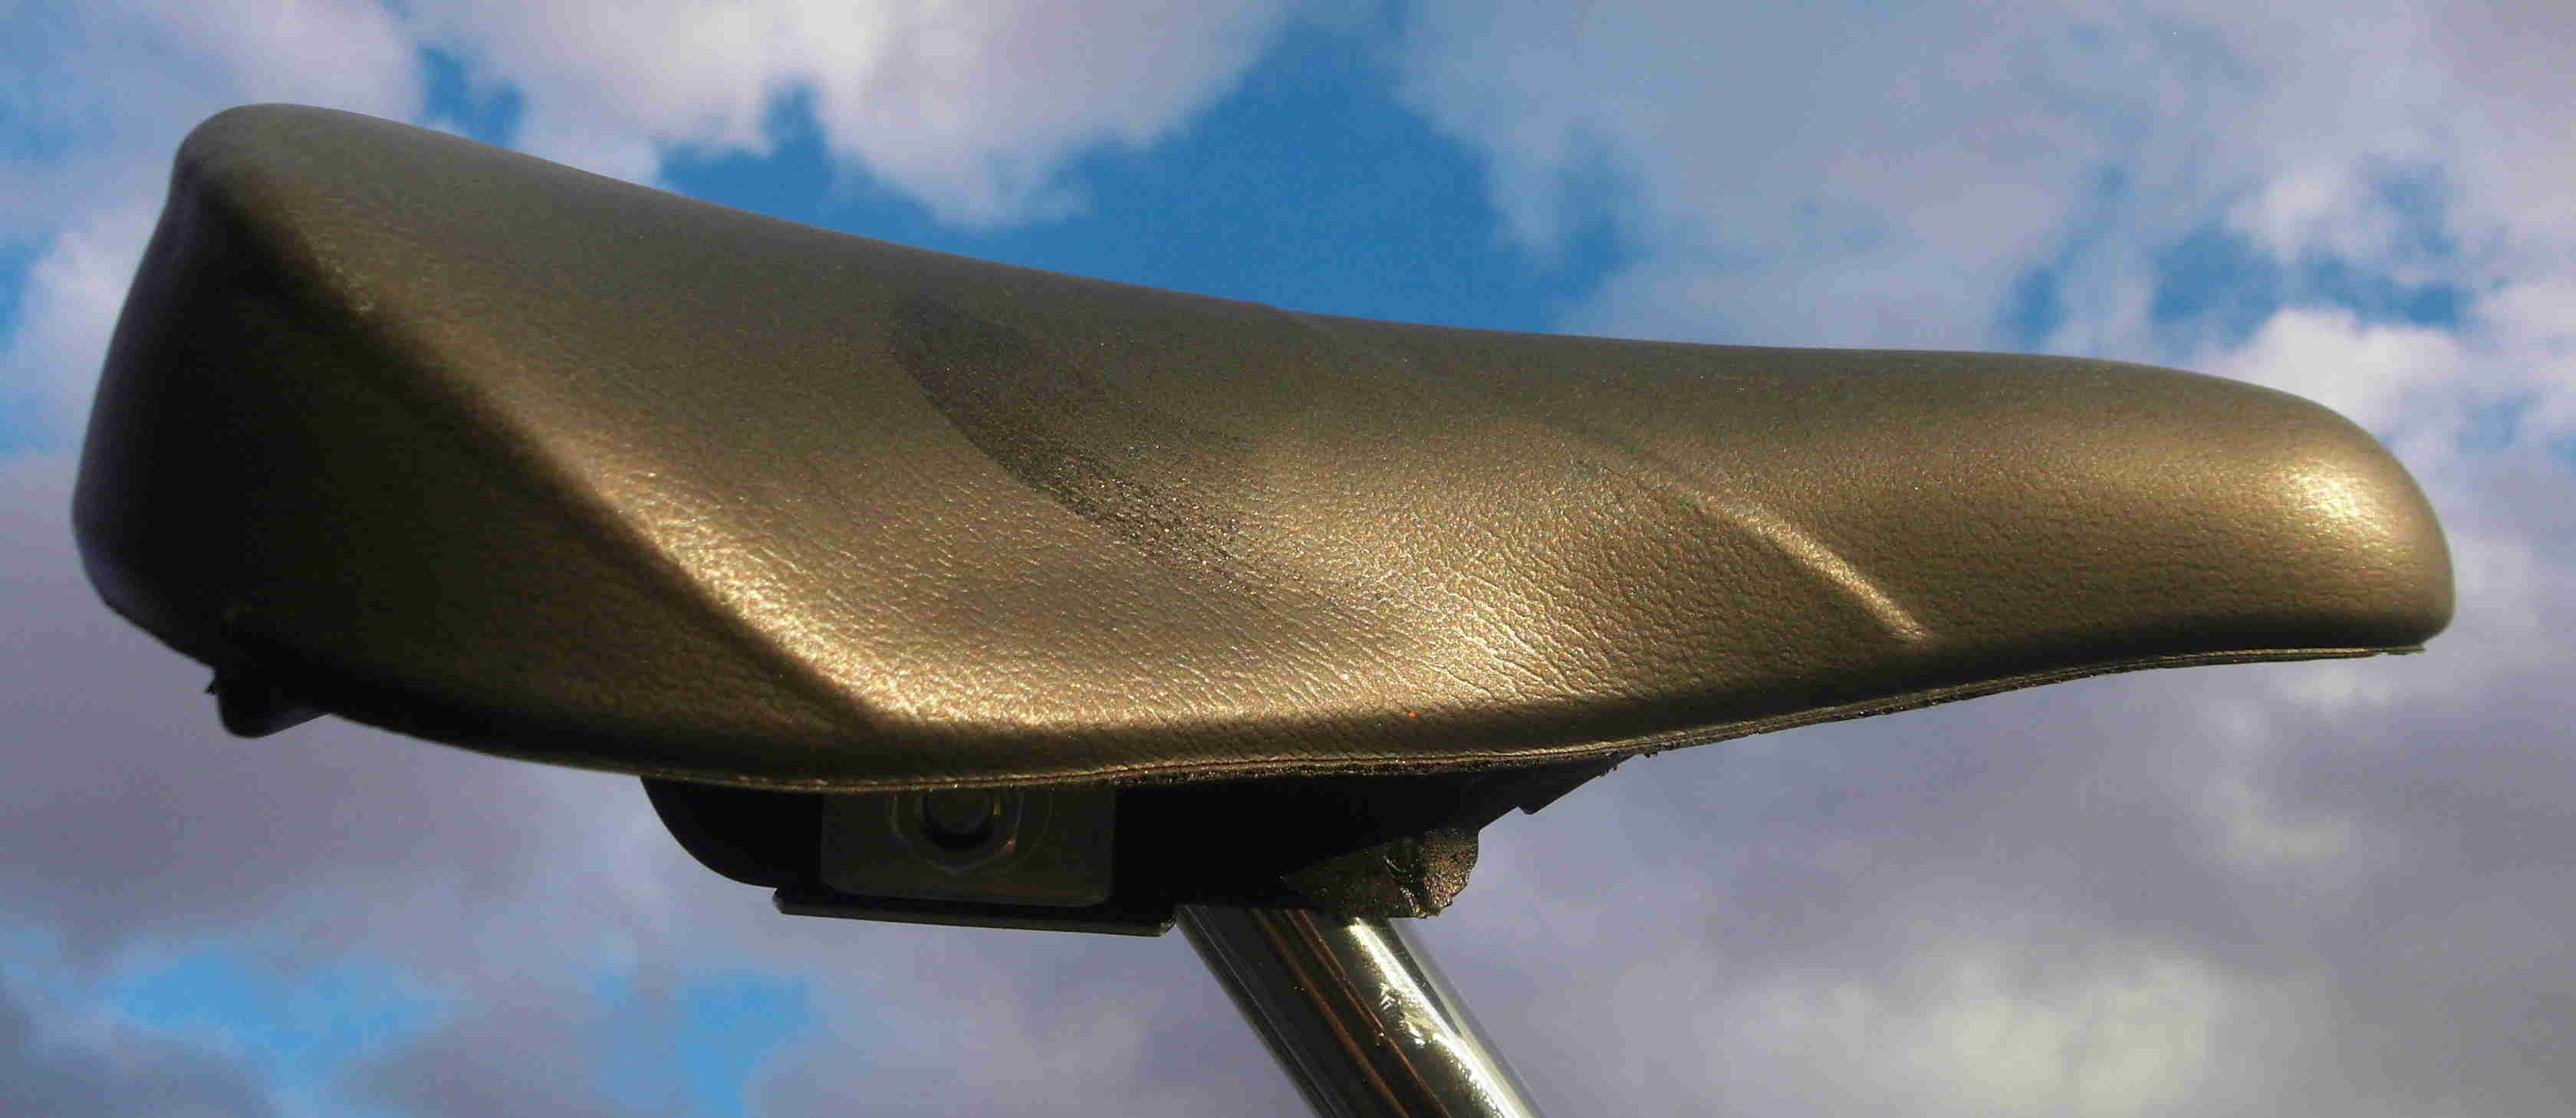 Saddle RVS Selle Royal NOS from the 80s